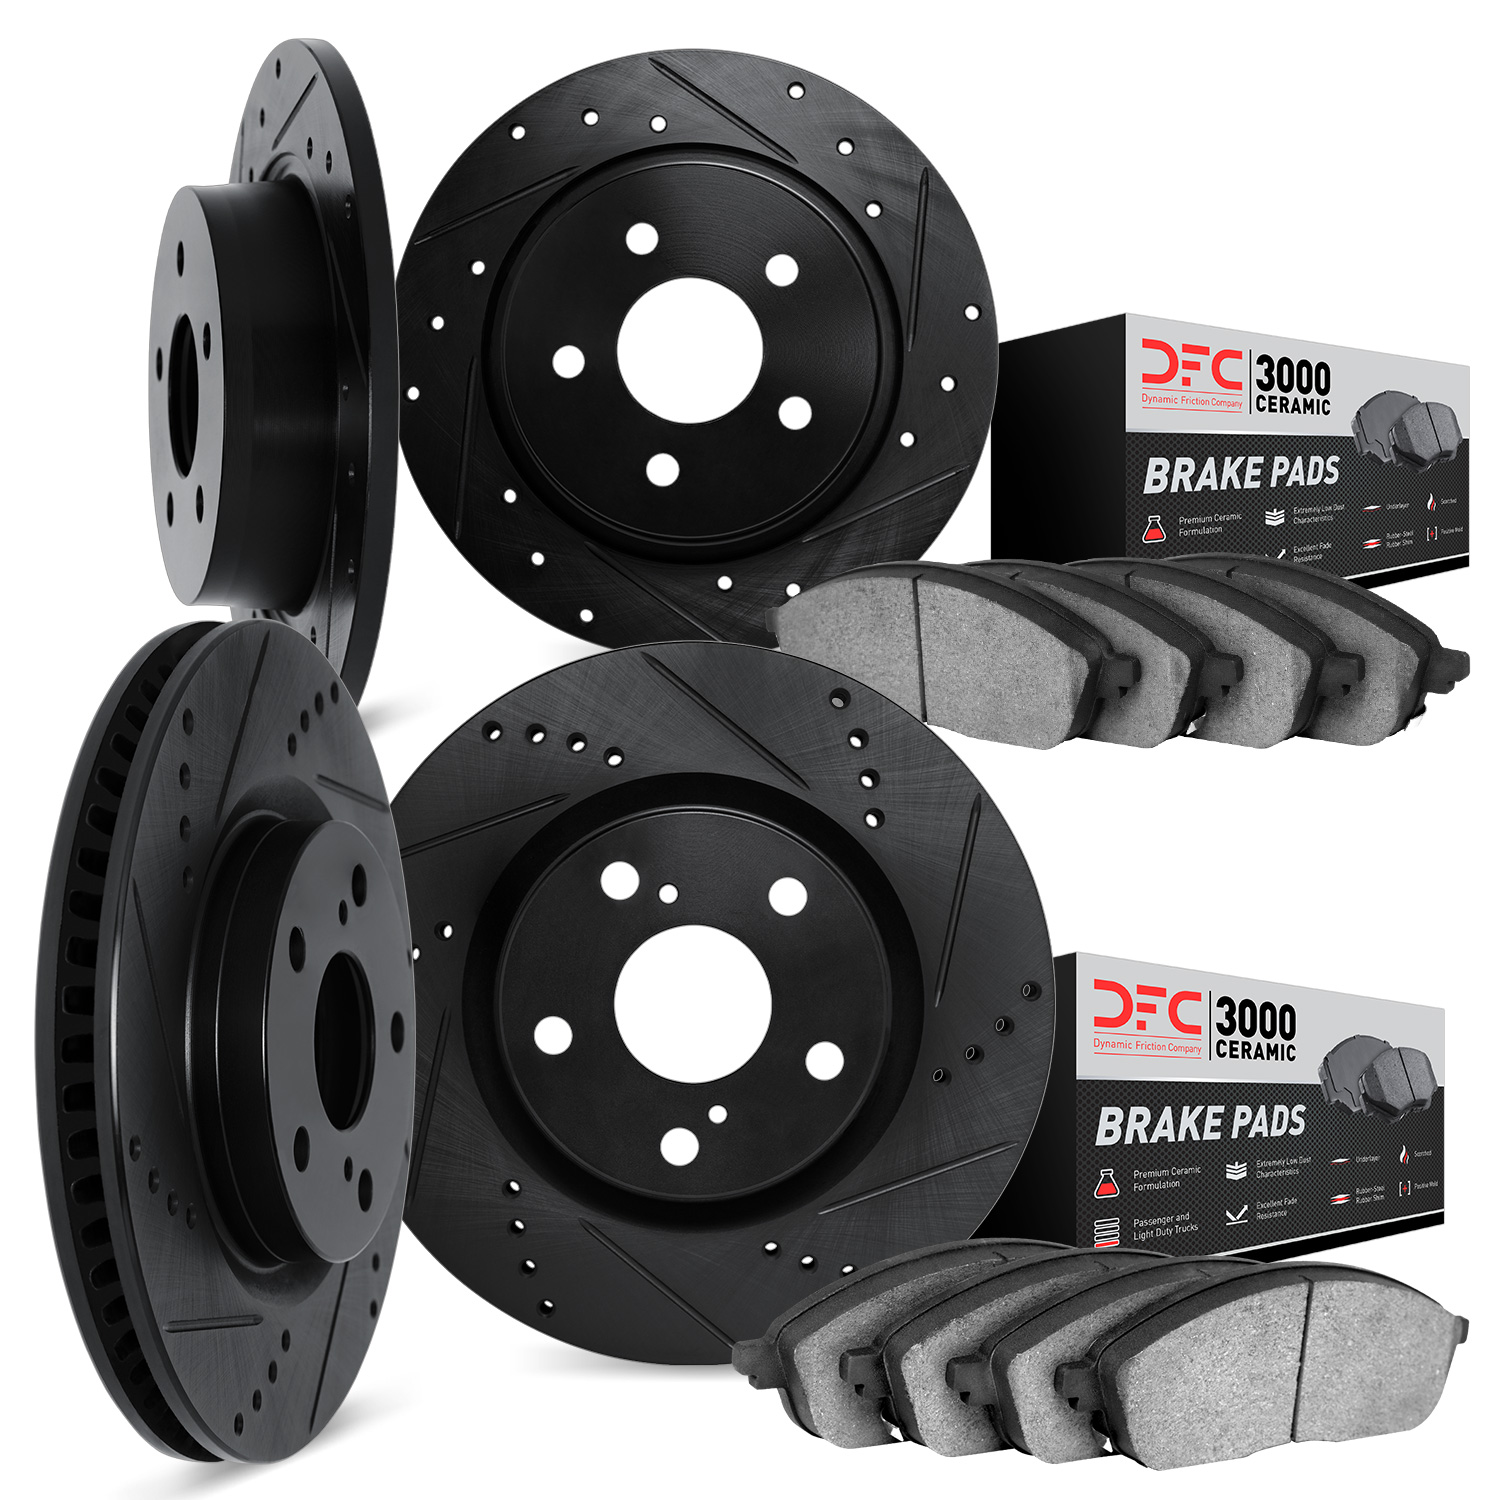 8304-13014 Drilled/Slotted Brake Rotors with 3000-Series Ceramic Brake Pads Kit [Black], 2001-2001 Subaru, Position: Front and R